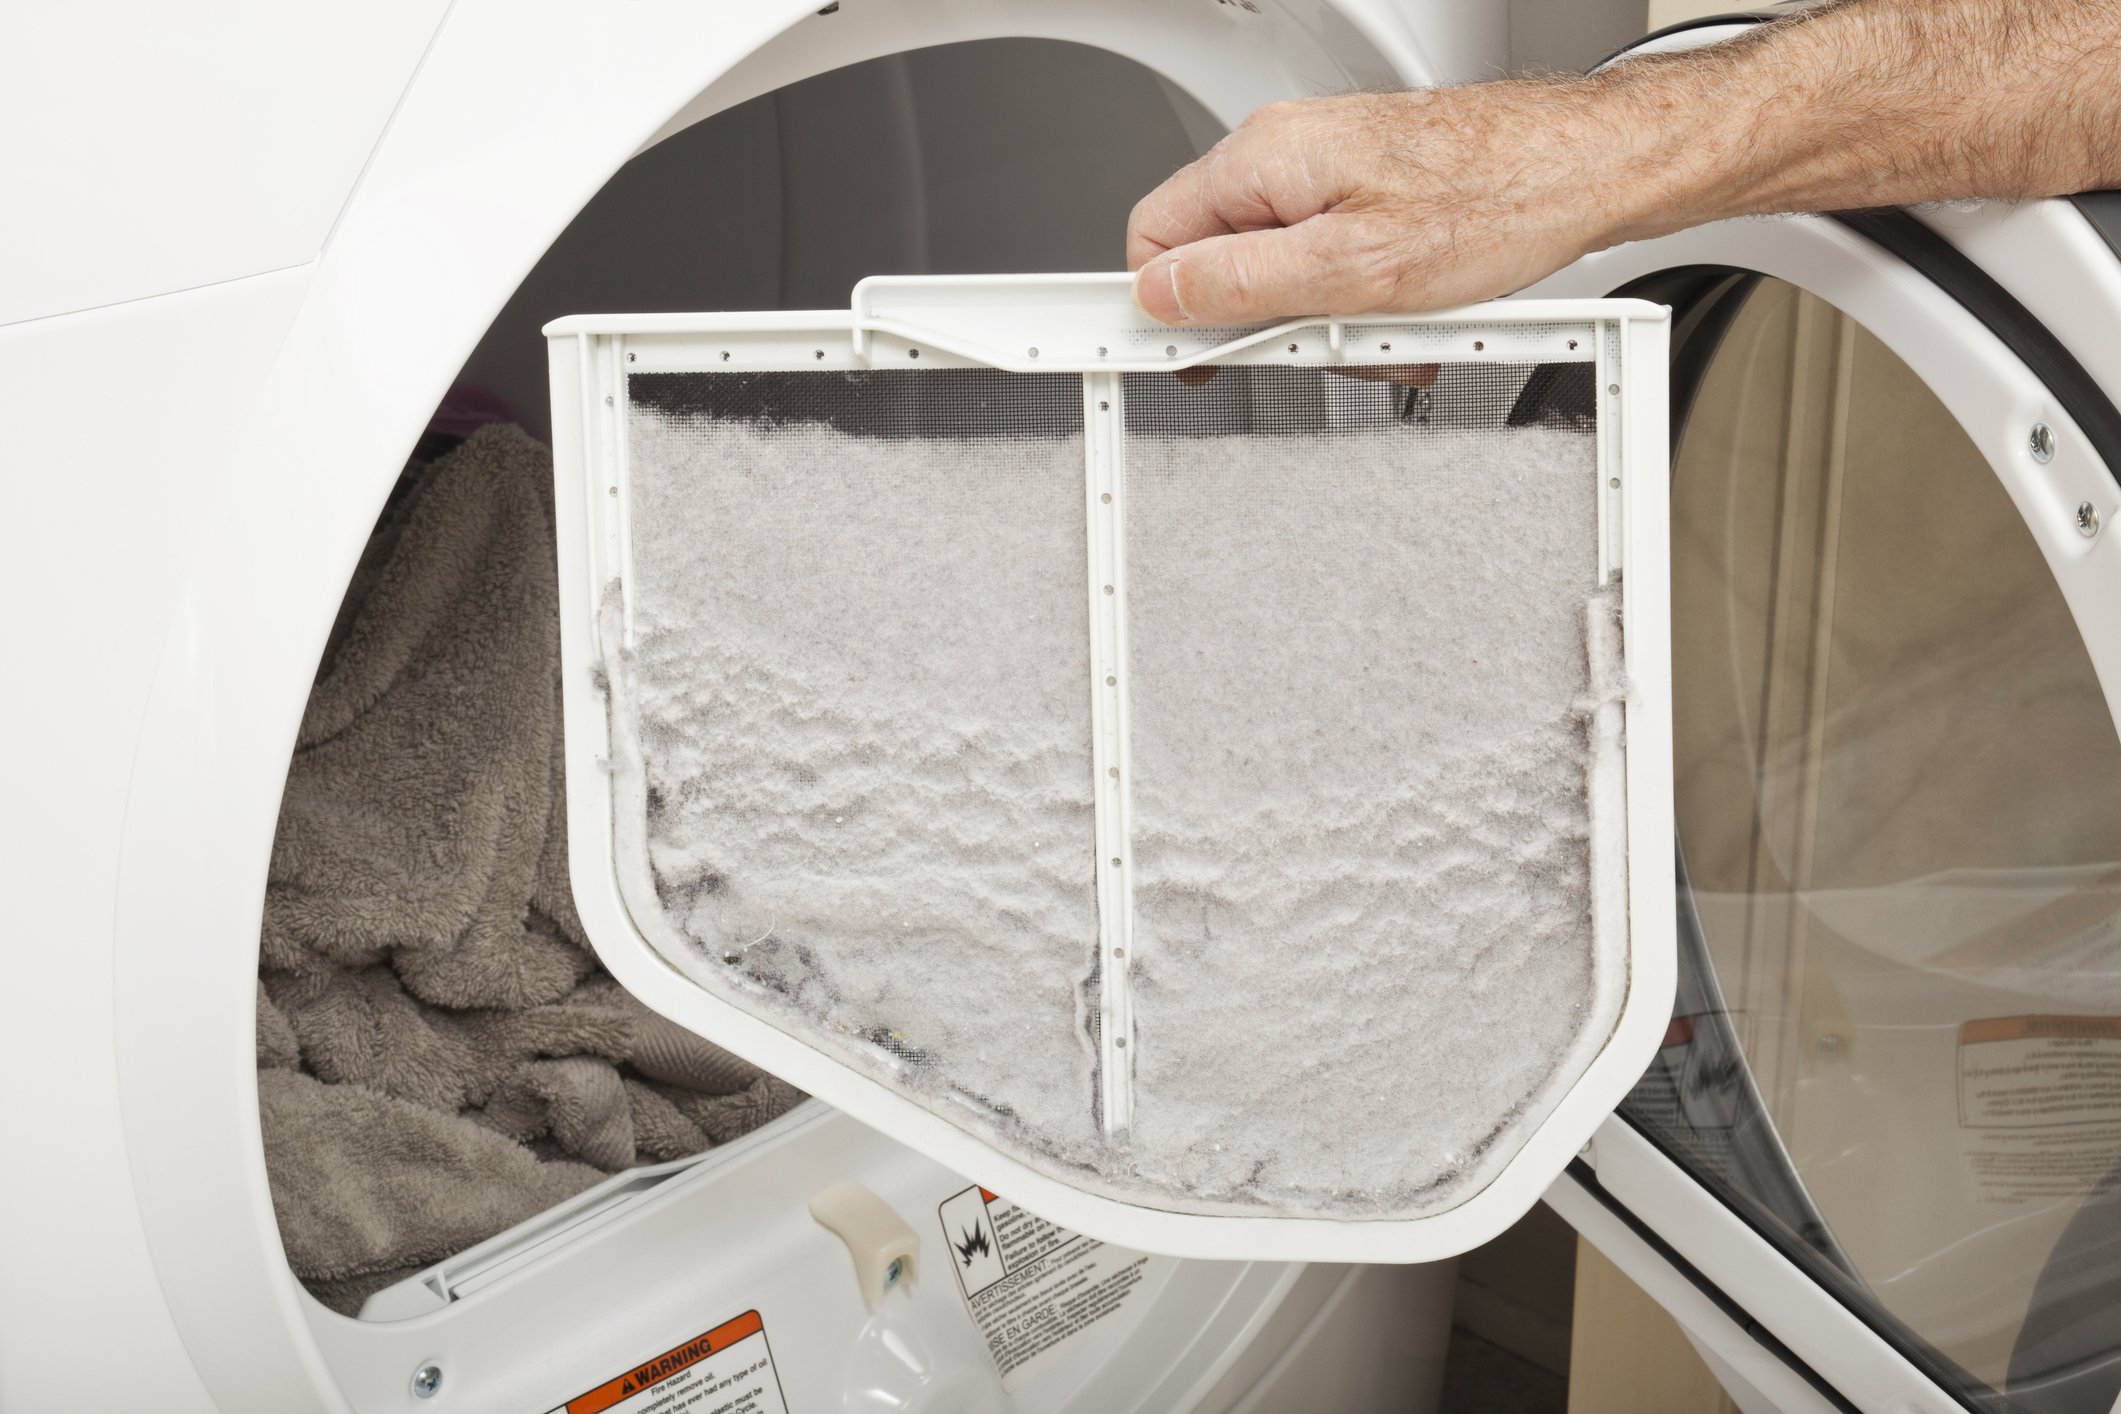 fire prevention, residential clothes dryer fires, home inspection